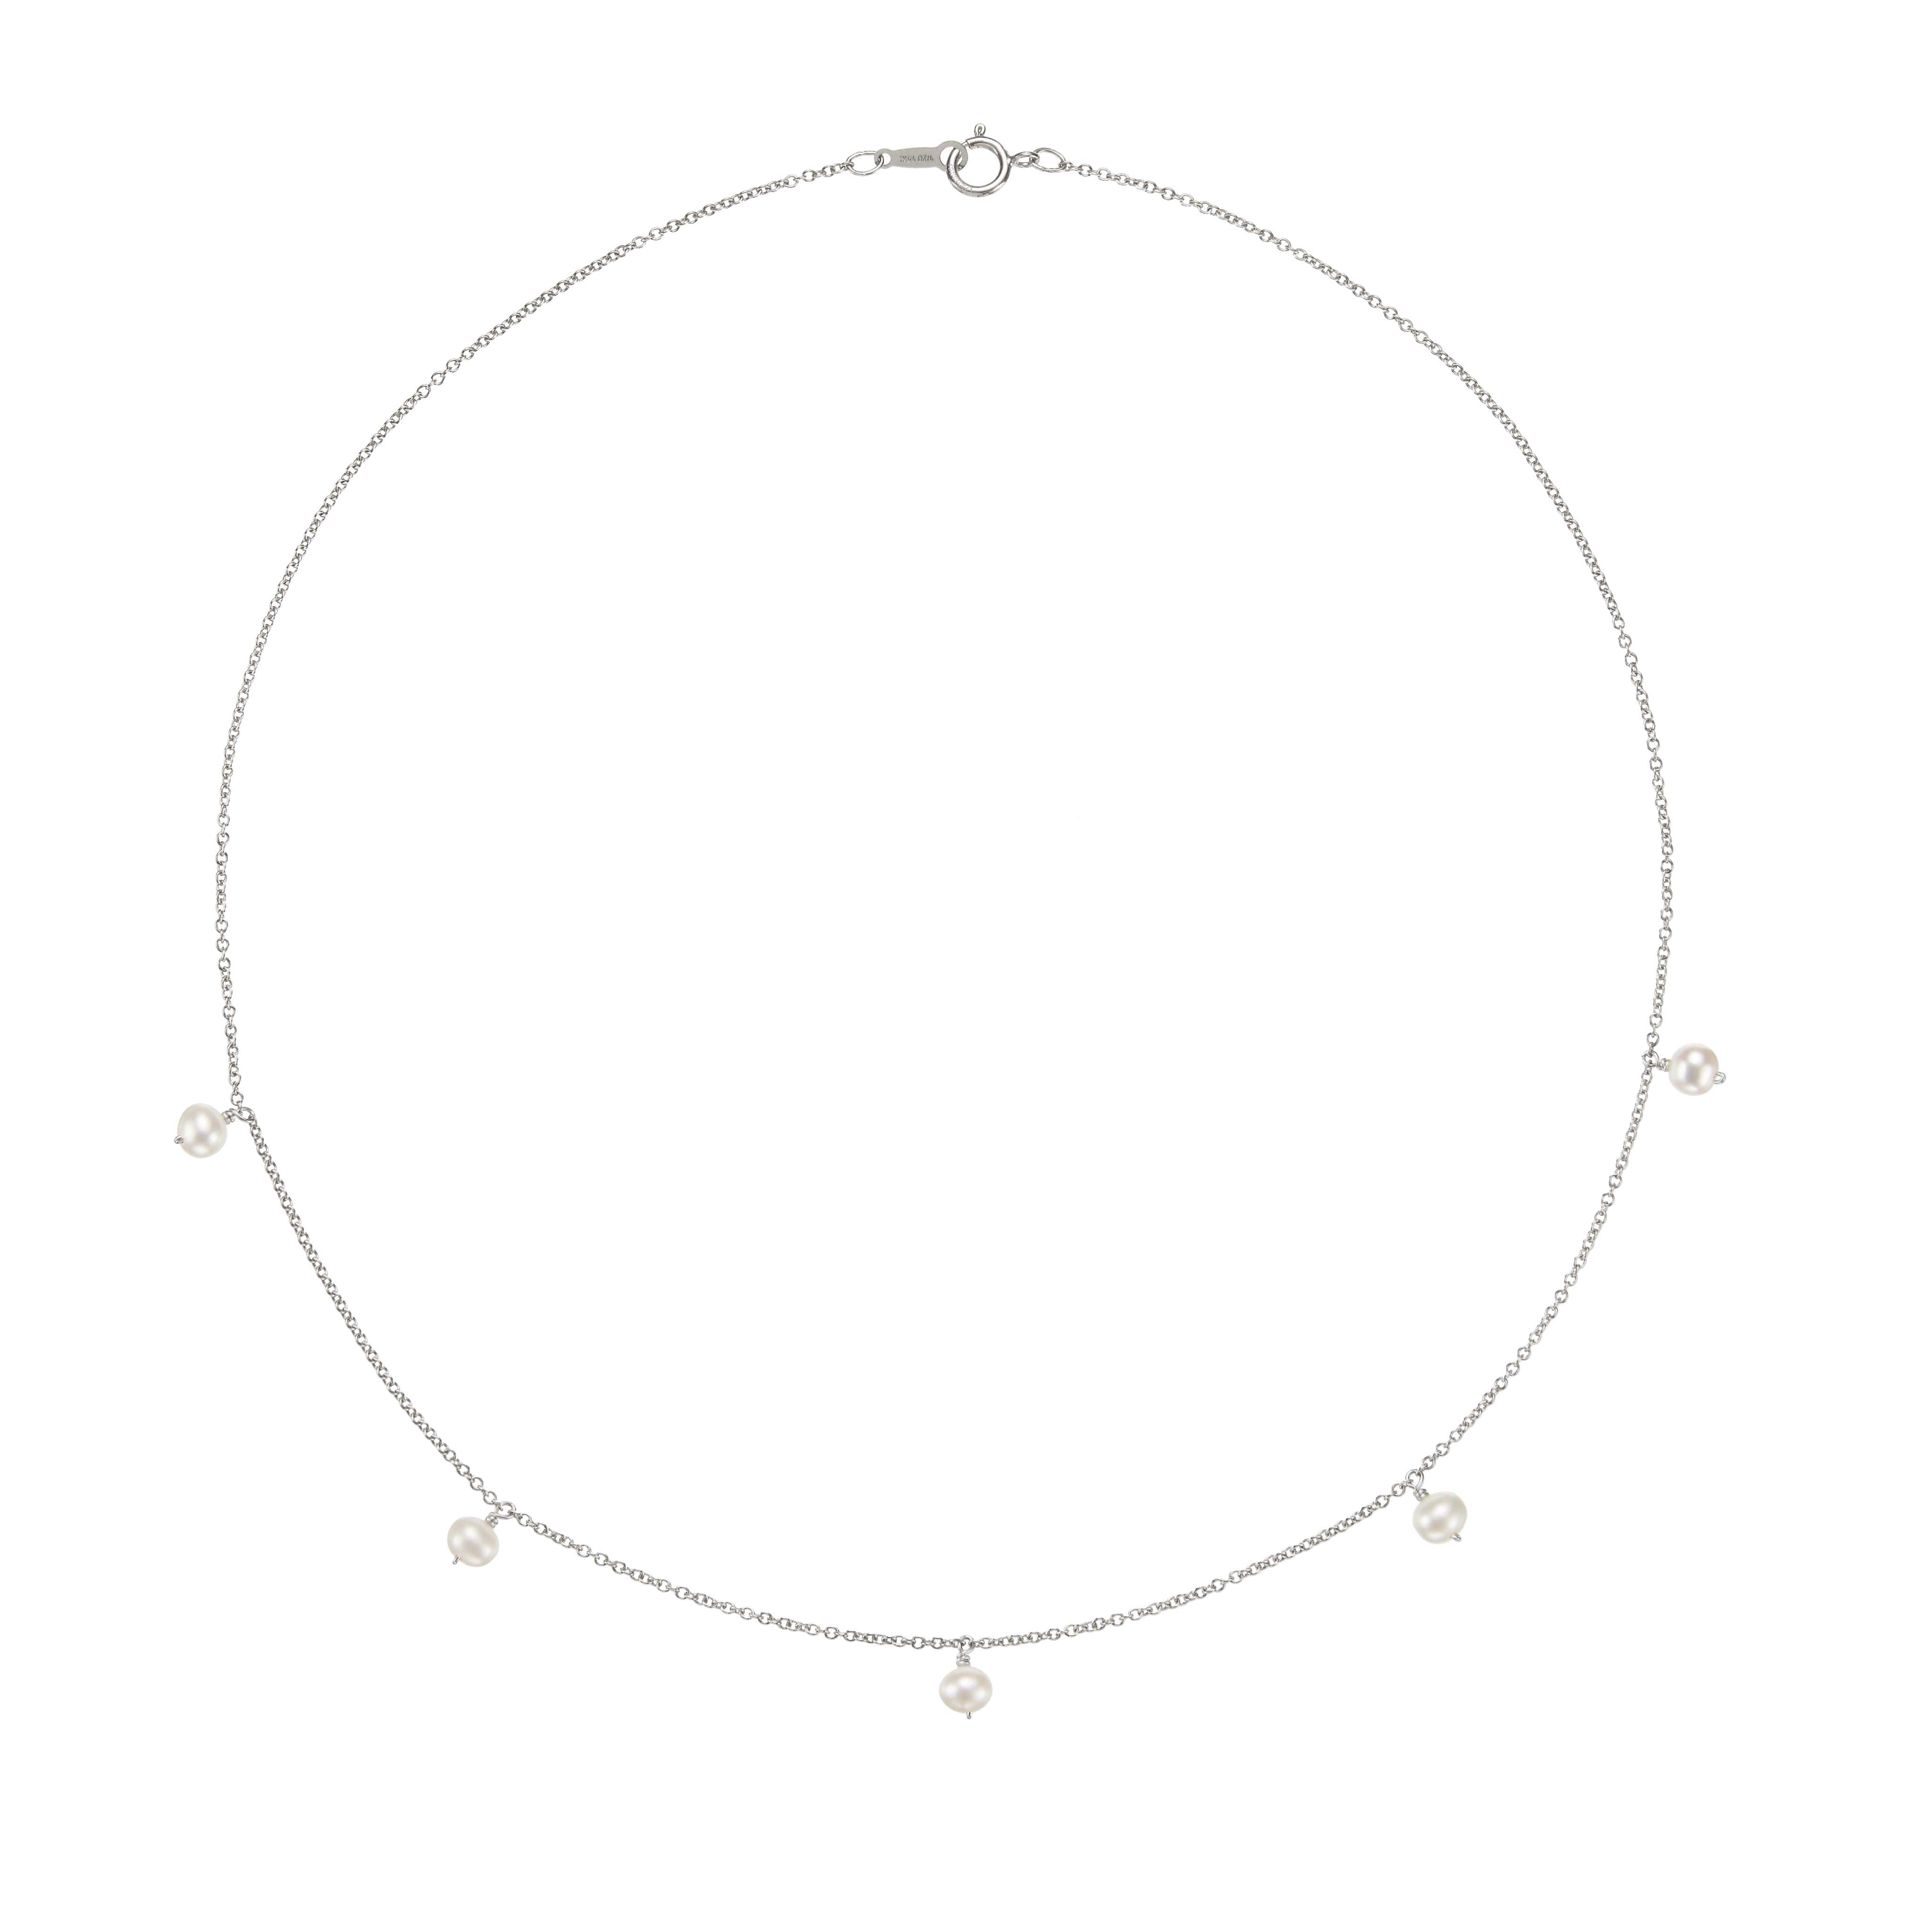 Solid White Gold Five Pearl Drop Choker